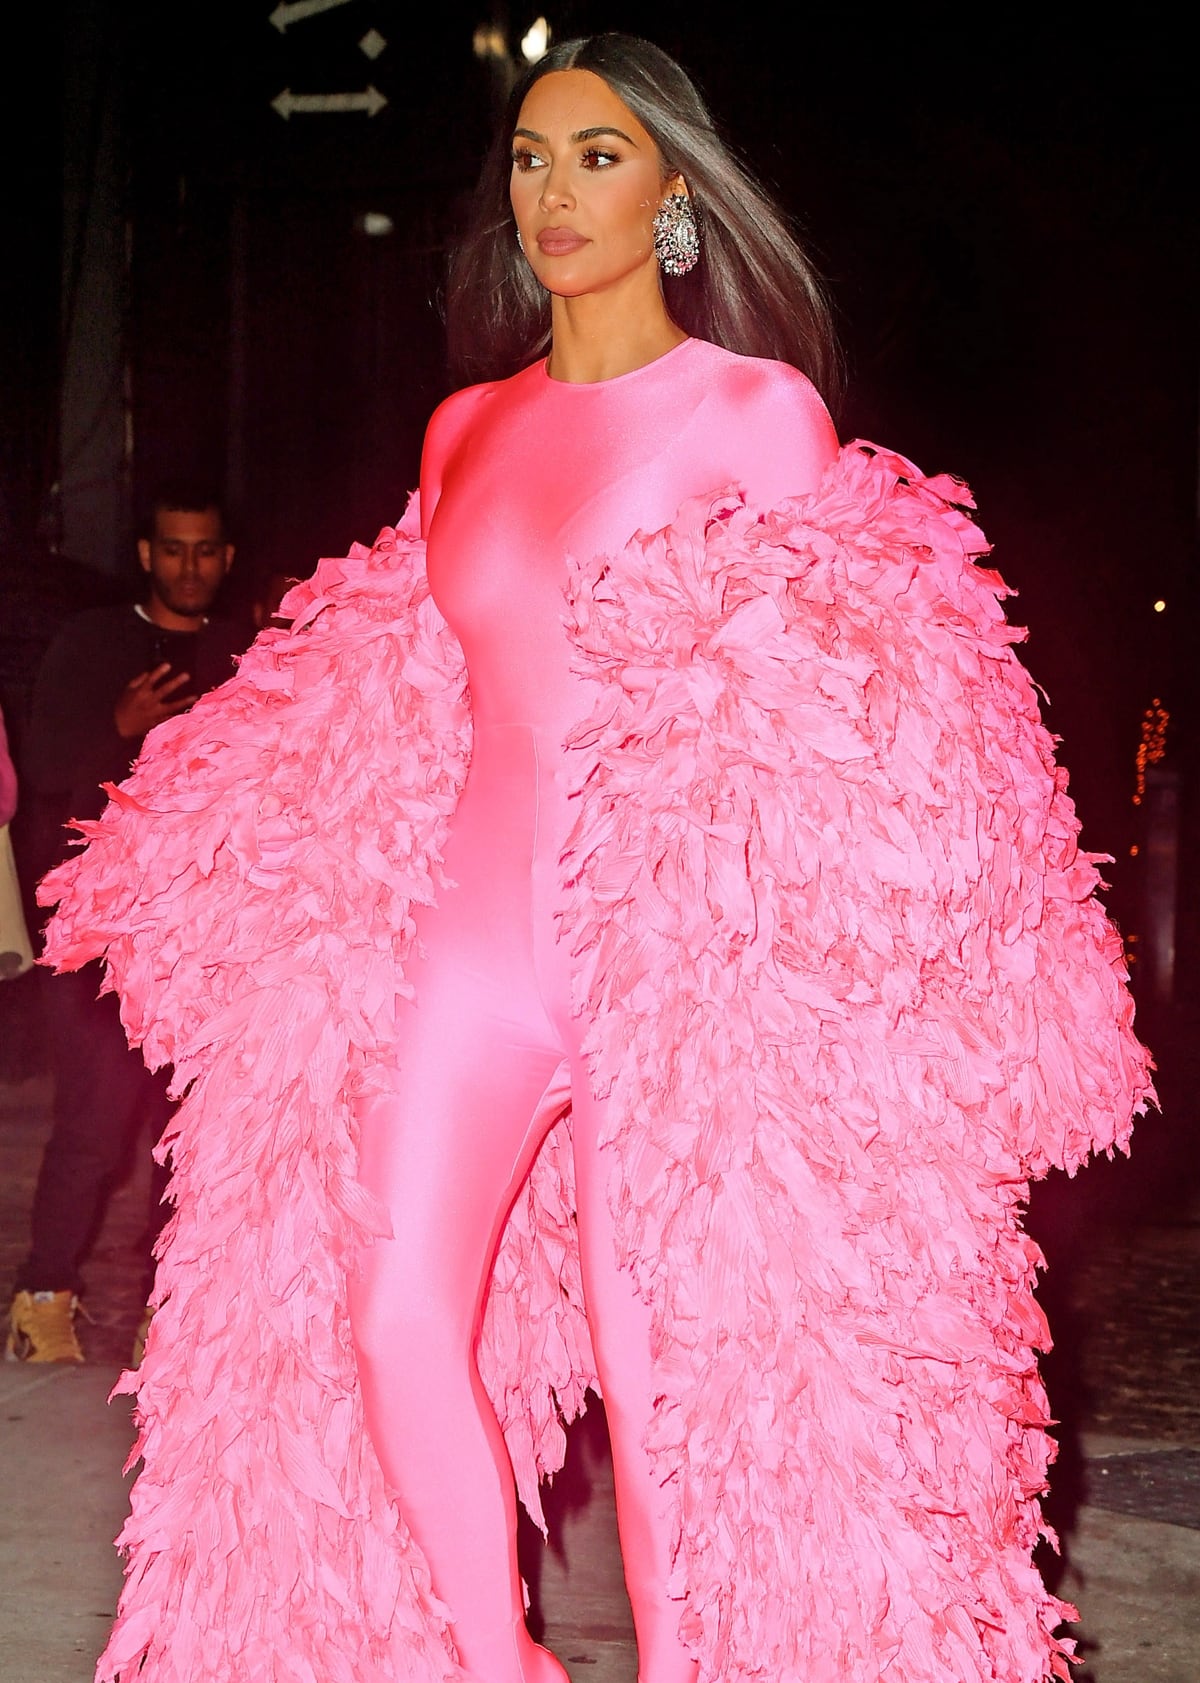 Kim Kardashian styled a hot pink catsuit by Balenciaga with a luxurious ruffled coat